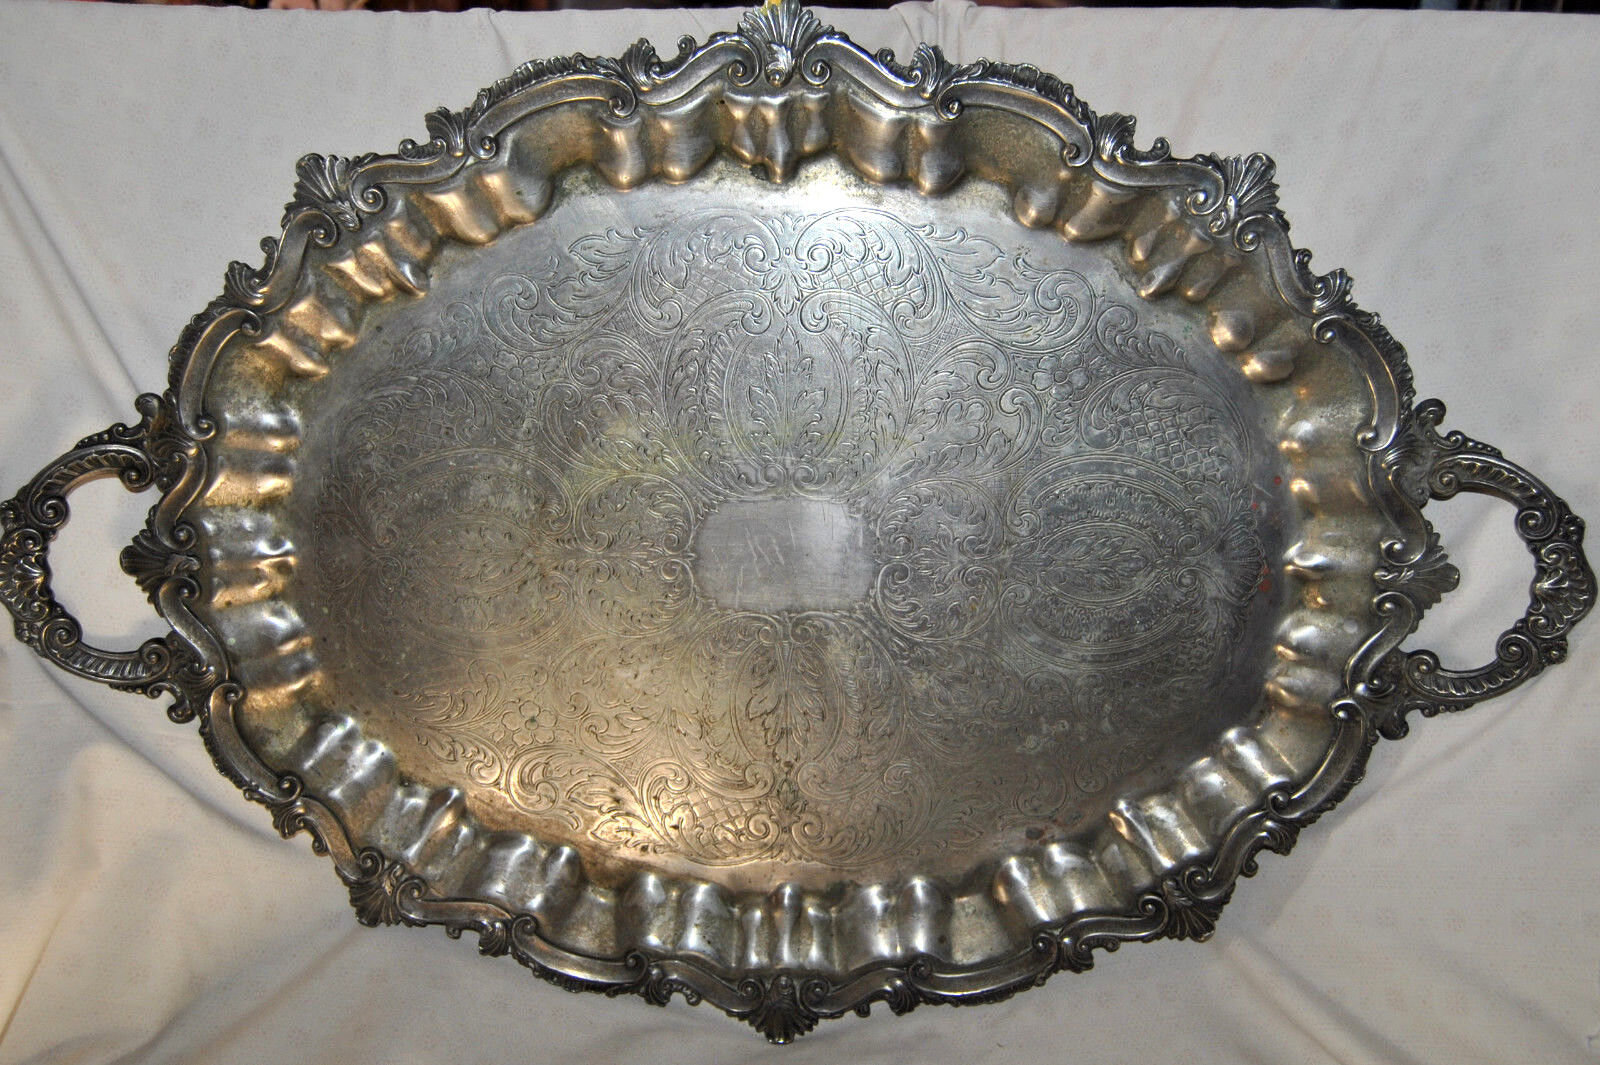 ANTIQUE VICTORIAN ORNATE LARGE SILVERPLATE TRAY Crown Makers Hallmark 19th C